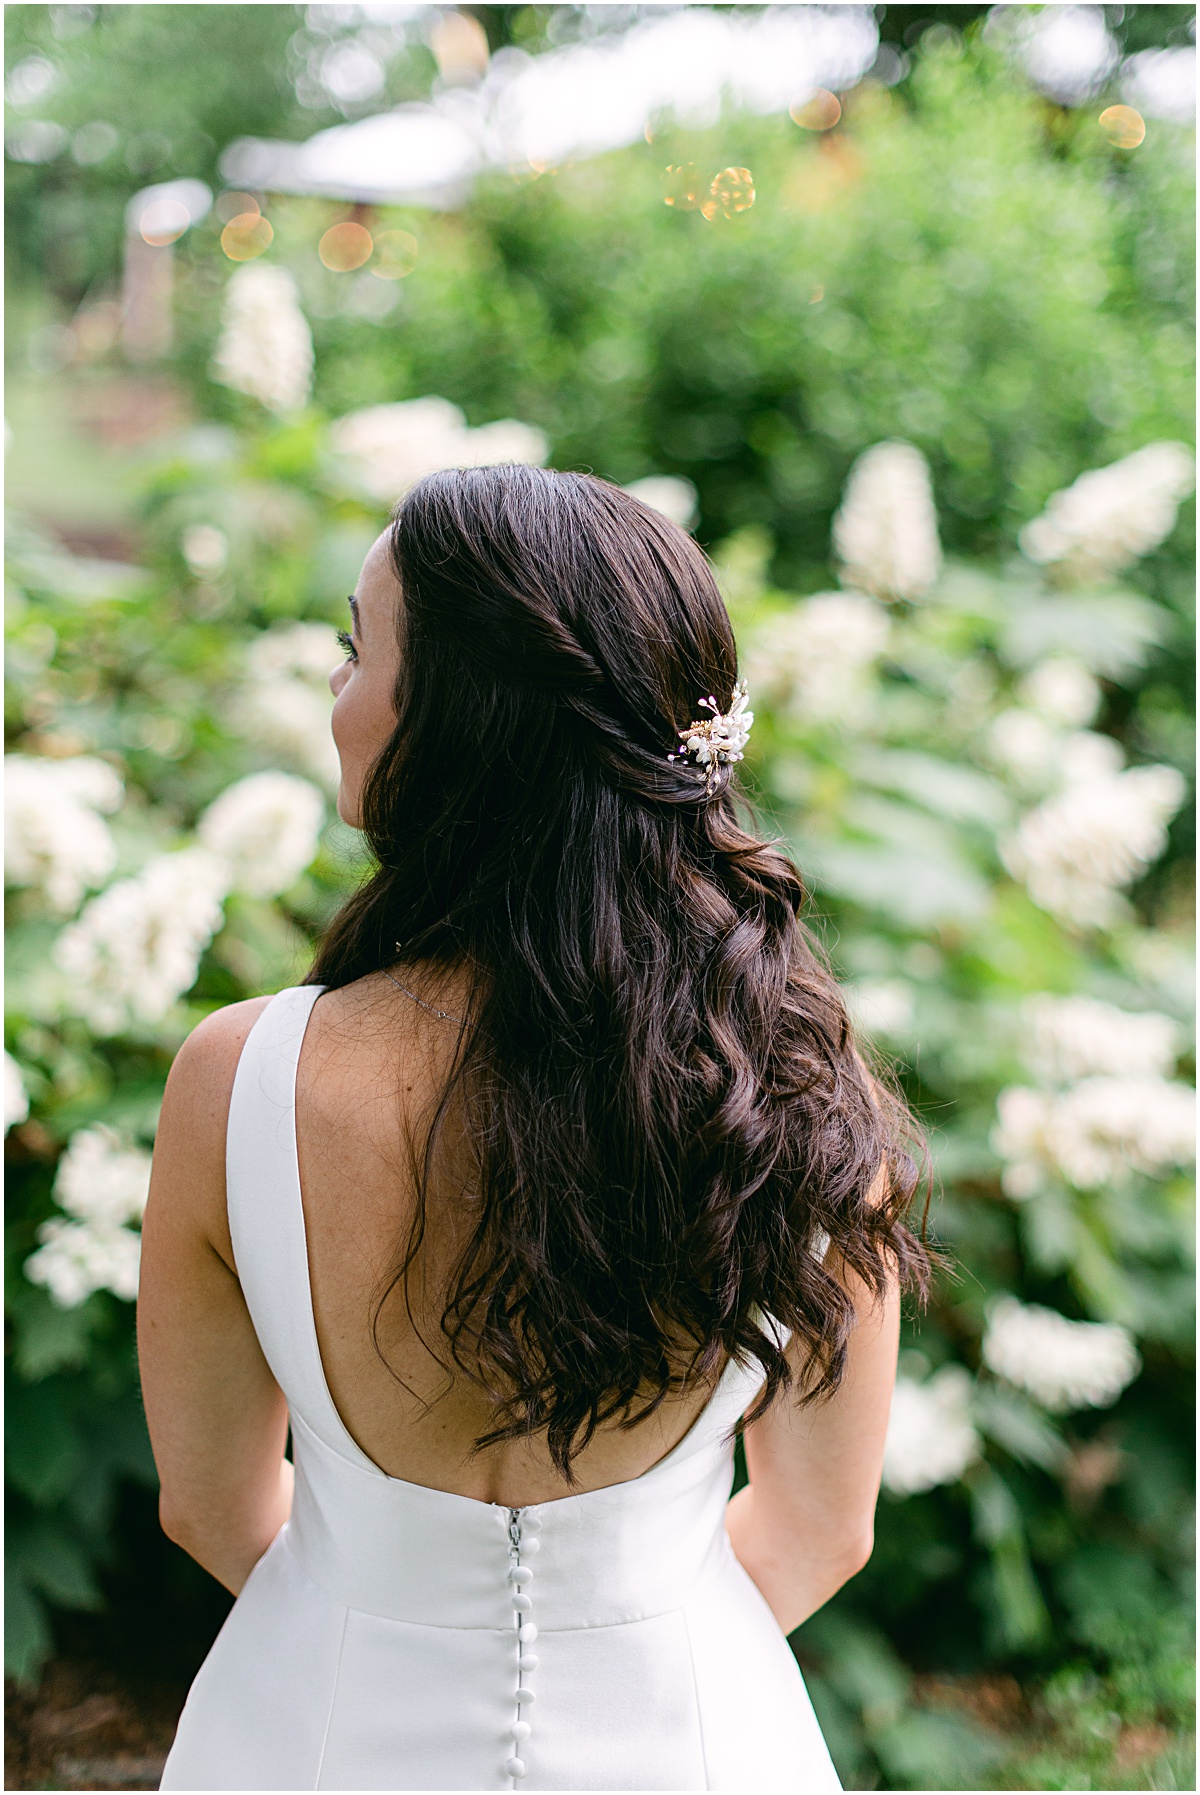 Hair by Claudine Fay. Joyful summer wedding at the Inn at Willow Grove by Sarah Bradshaw. Planning by Kelley Cannon Events.